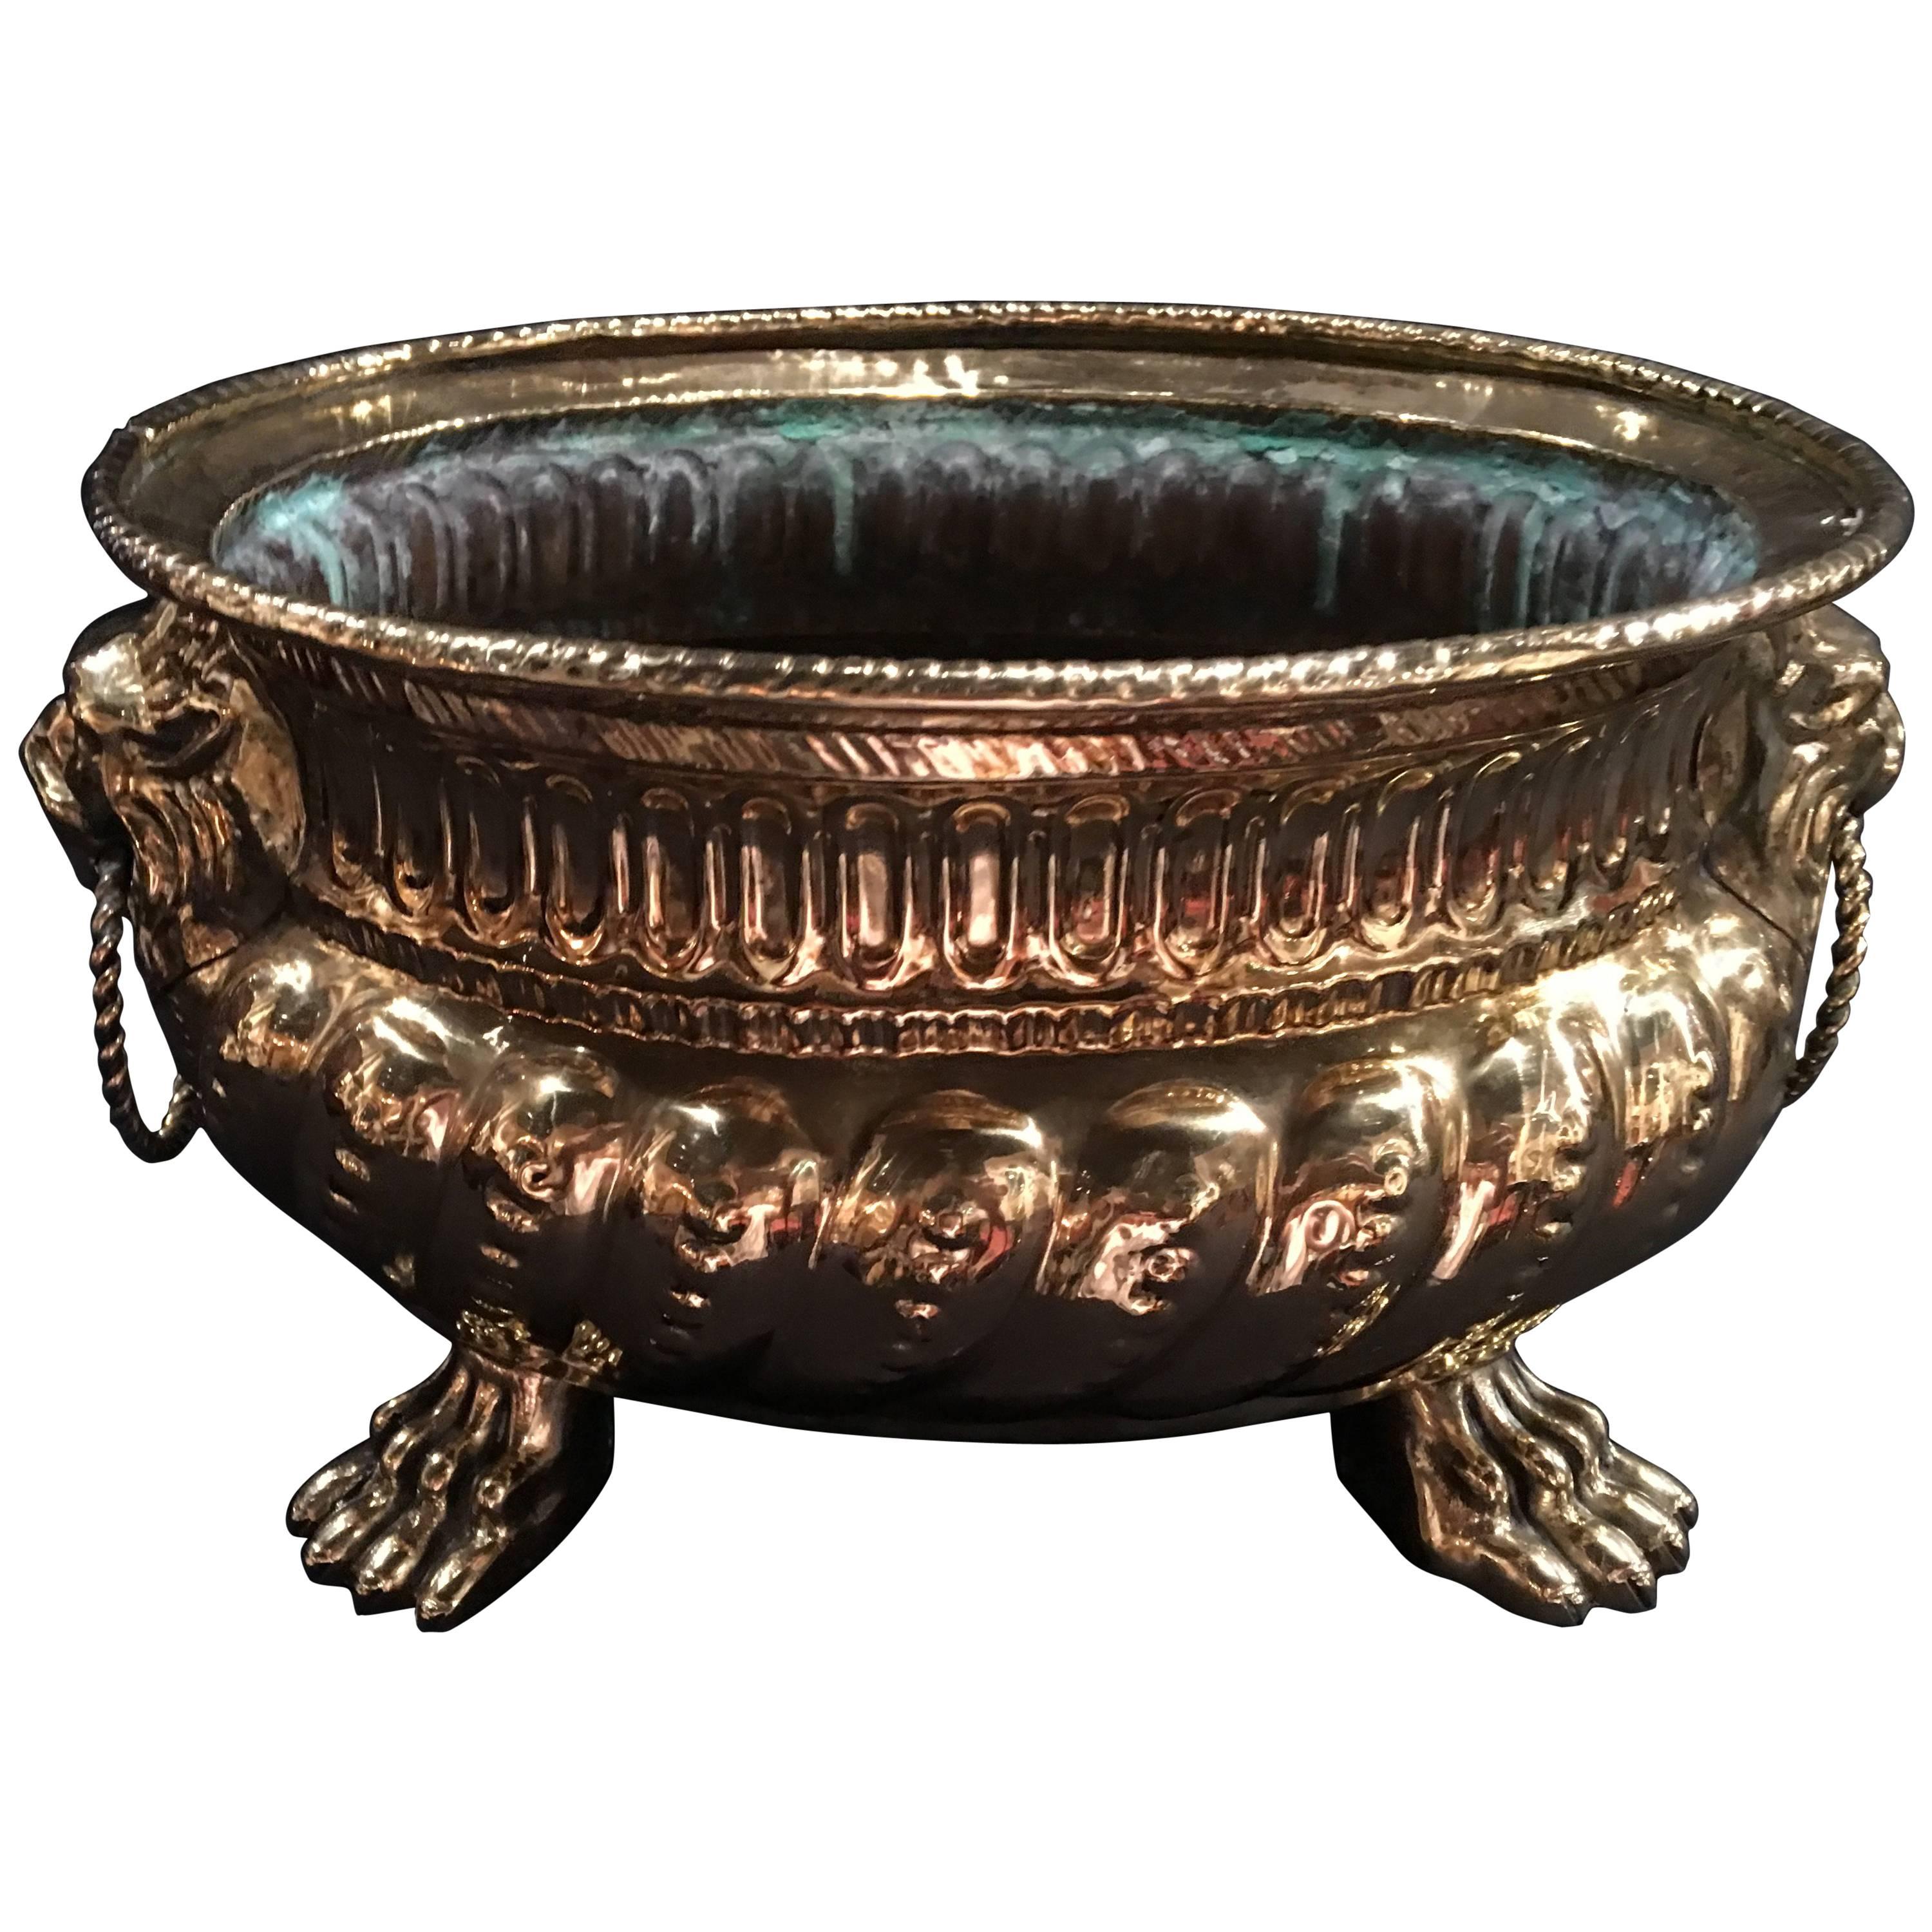 French Polished Brass Round Jardiniere or Planter with Handles, 19th Century